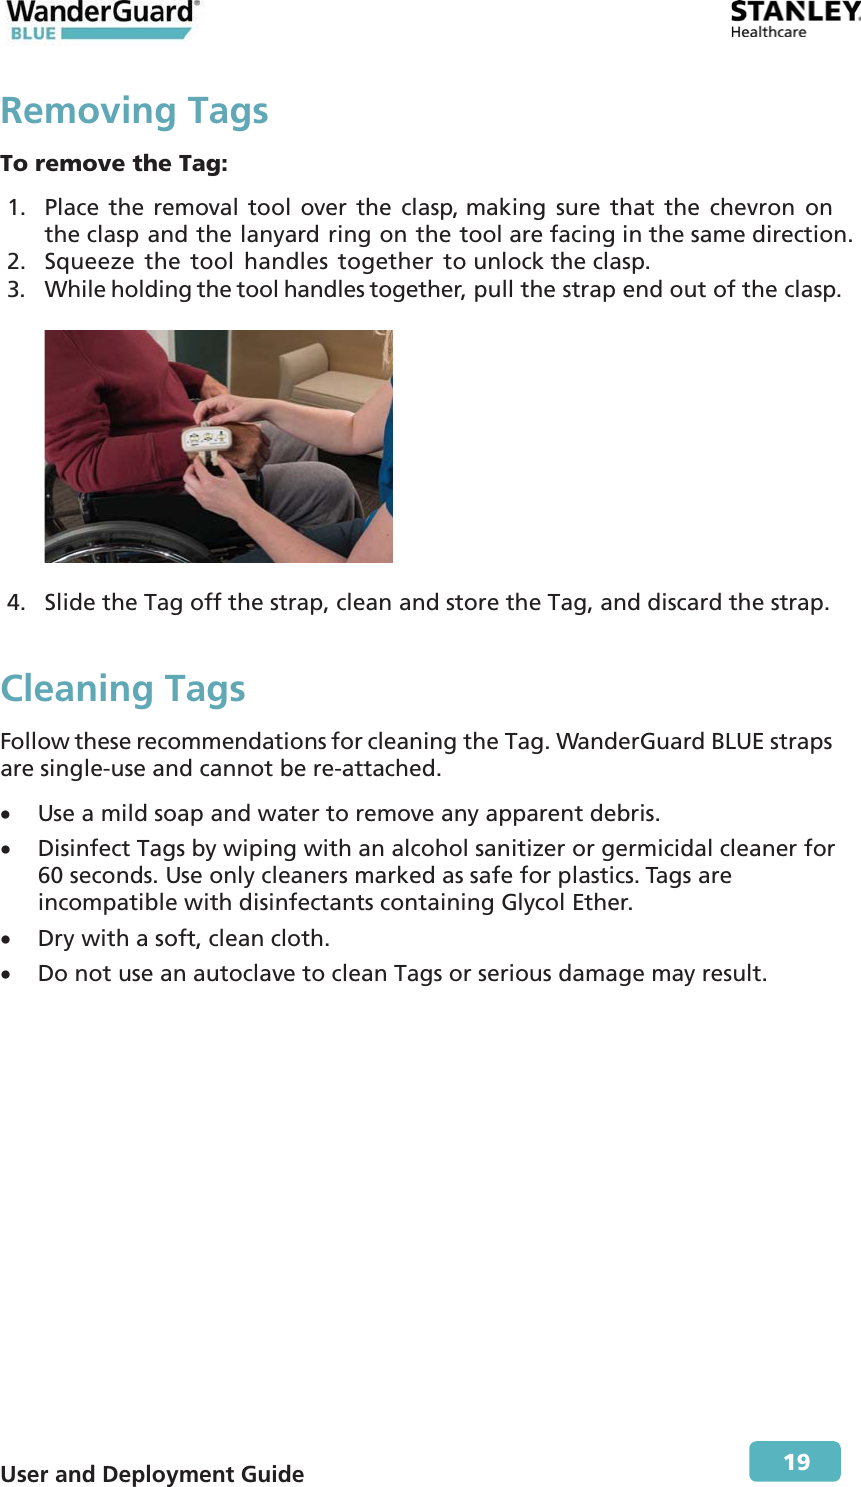  User and Deployment Guide        19 Removing TagsTo remove the Tag: 1. Place the removal tool over the clasp, making sure that the chevron on the clasp and the lanyard ring on the tool are facing in the same direction. 2. Squeeze the tool handles together to unlock the clasp. 3. While holding the tool handles together, pull the strap end out of the clasp.    4. Slide the Tag off the strap, clean and store the Tag, and discard the strap. Cleaning Tags Follow these recommendations for cleaning the Tag. WanderGuard BLUE straps are single-use and cannot be re-attached. x Use a mild soap and water to remove any apparent debris. x Disinfect Tags by wiping with an alcohol sanitizer or germicidal cleaner for 60 seconds. Use only cleaners marked as safe for plastics. Tags are incompatible with disinfectants containing Glycol Ether. x Dry with a soft, clean cloth. x Do not use an autoclave to clean Tags or serious damage may result. 